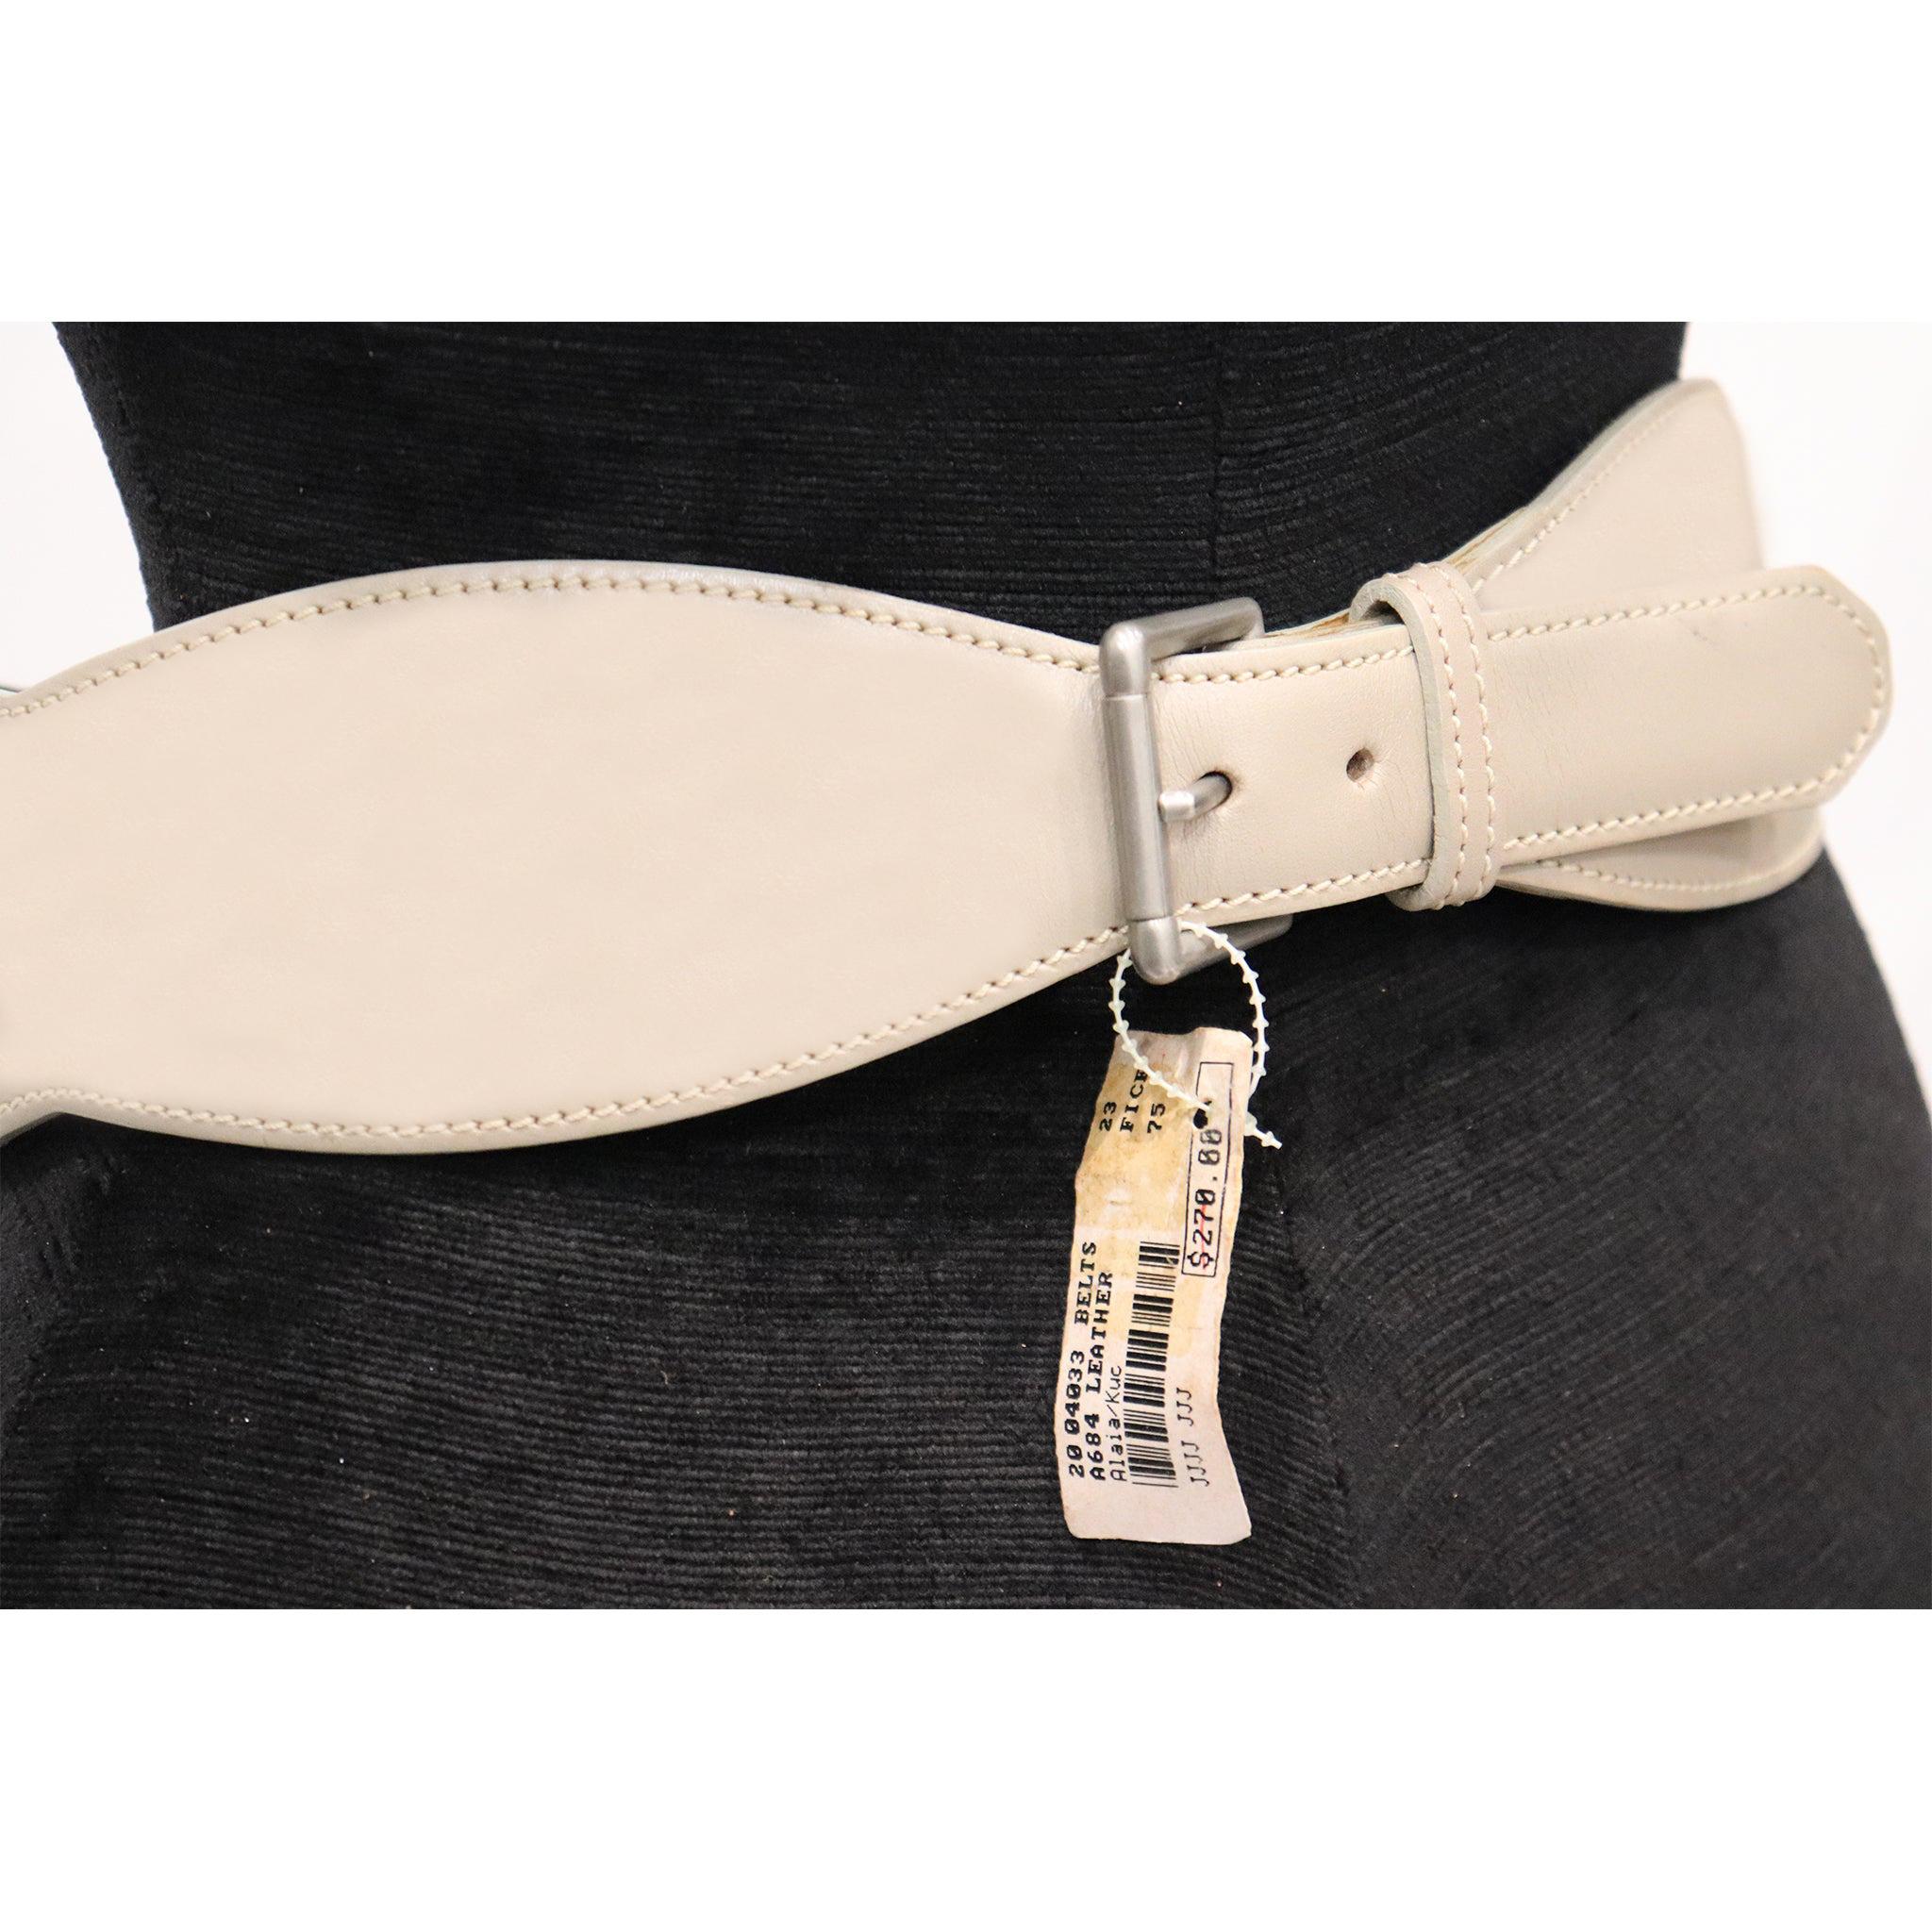 Alaia  Gray Leather Belt W/ Gold Accents. From 1980s in excellent condition. New with Tag

Measurements:

Longest length - 29.8 inches
Shortest length - 28 inches
Width - 2.5 inches